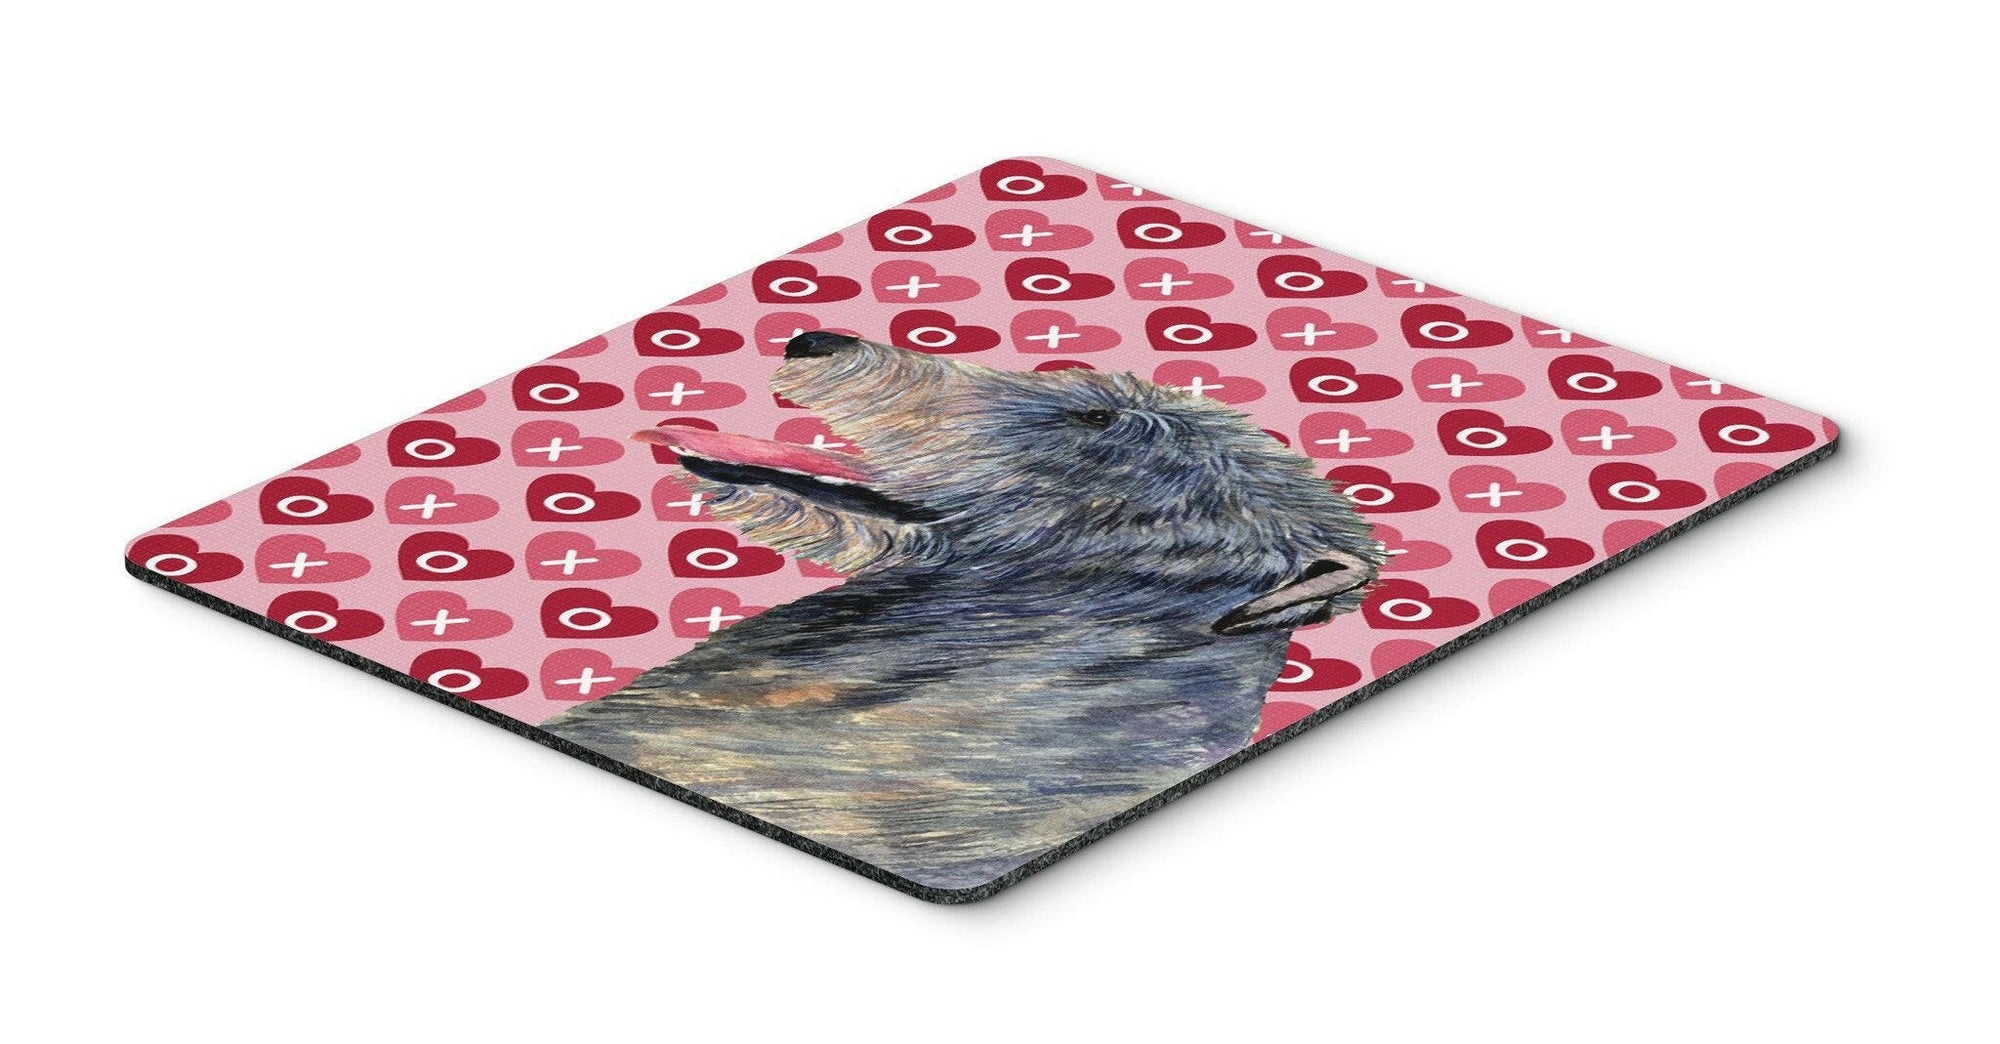 Irish Wolfhound Hearts Love and Valentine's Day Mouse Pad, Hot Pad or Trivet by Caroline's Treasures